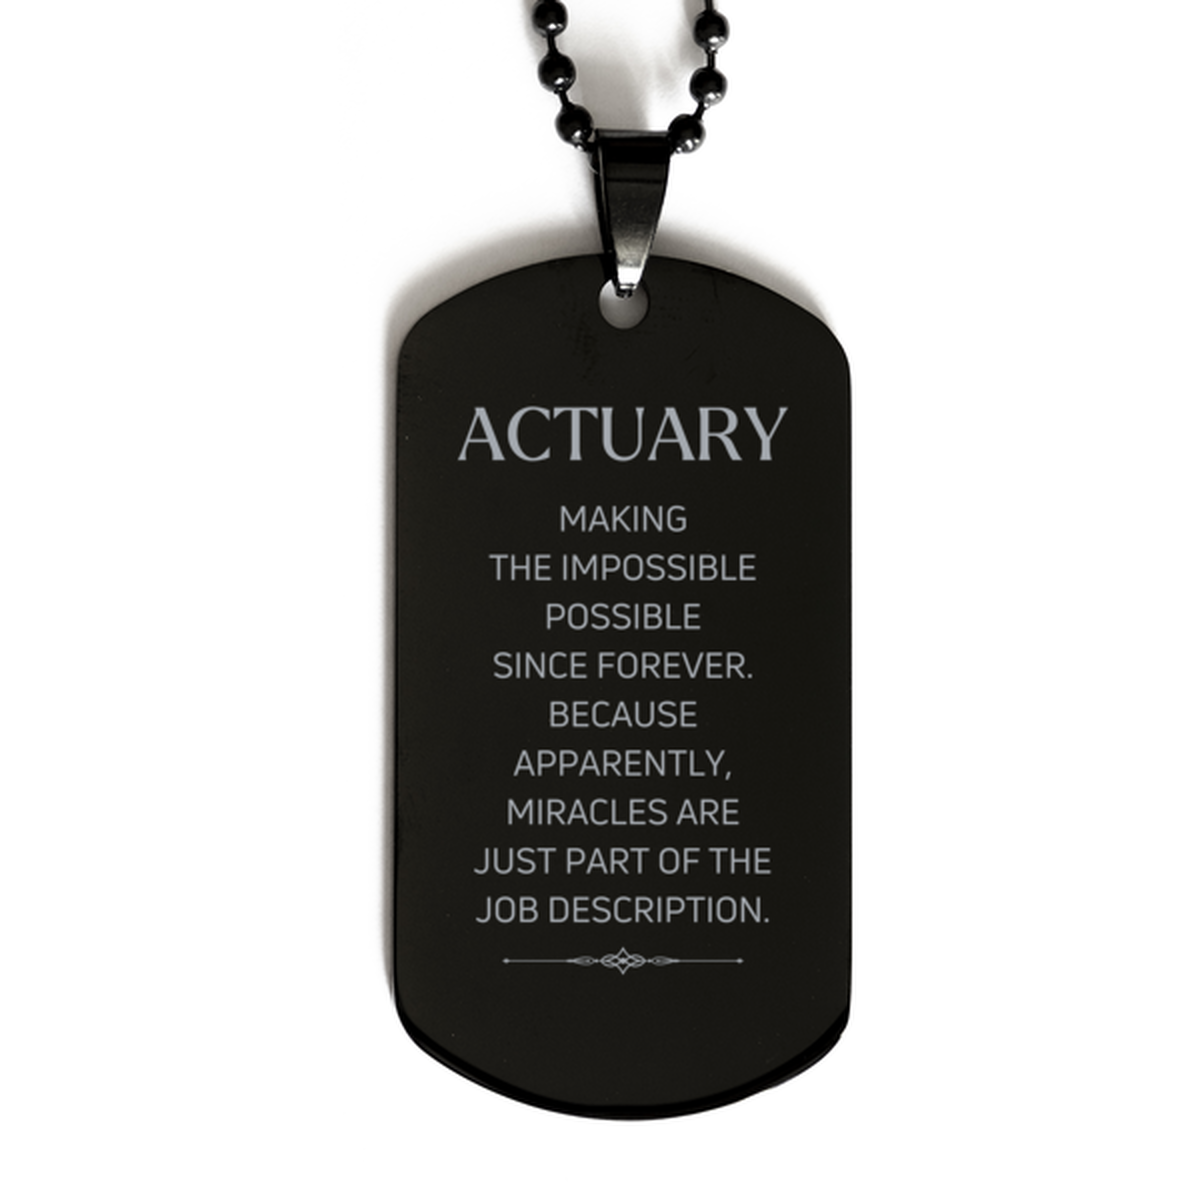 Funny Actuary Gifts, Miracles are just part of the job description, Inspirational Birthday Black Dog Tag For Actuary, Men, Women, Coworkers, Friends, Boss